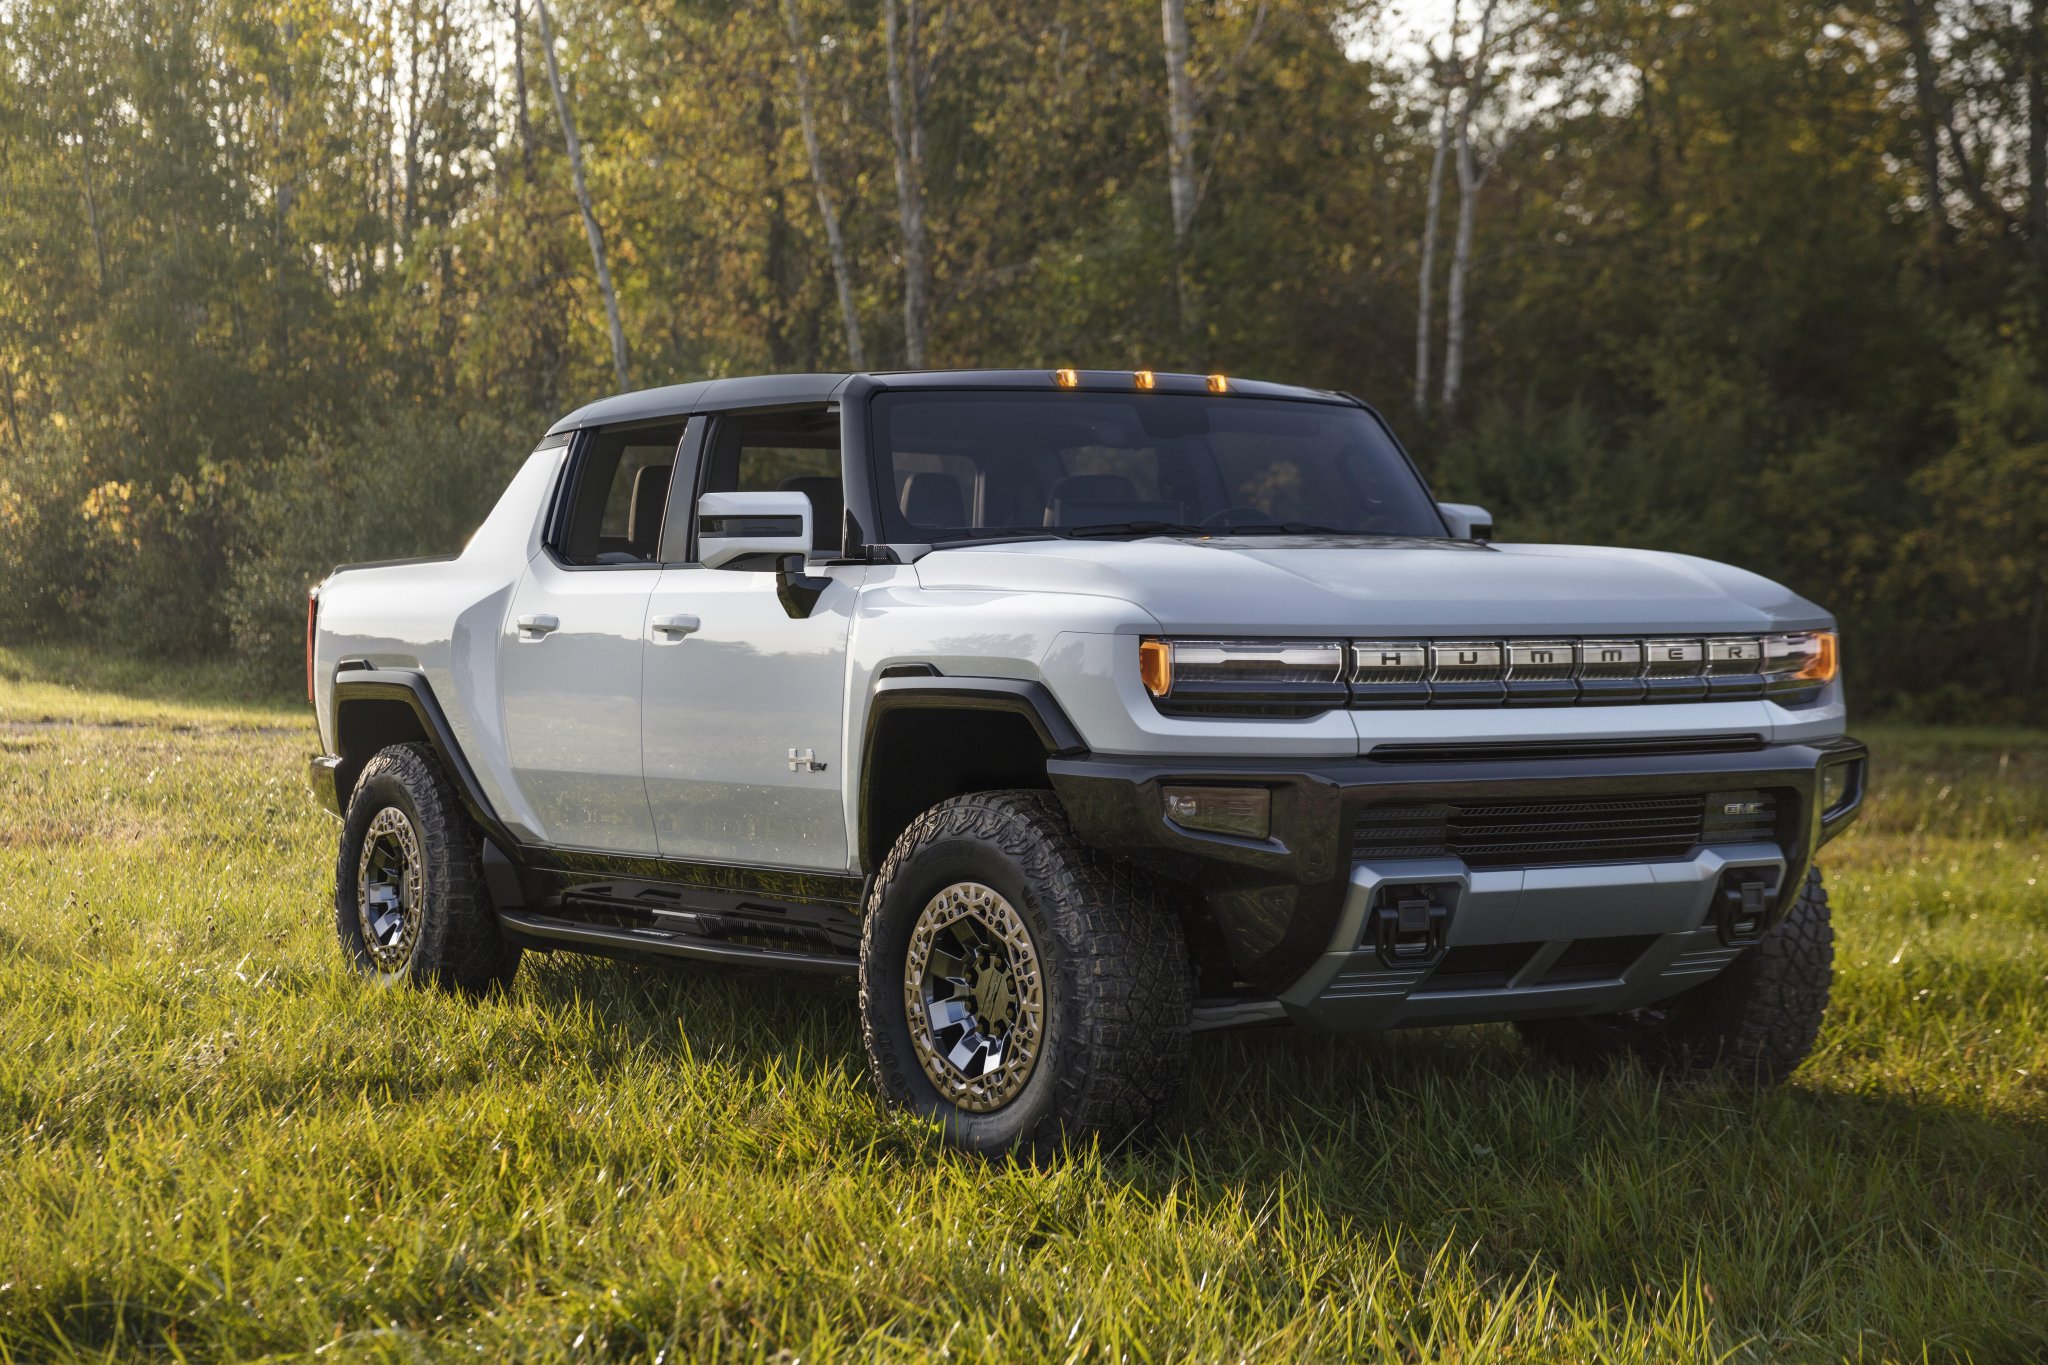 GMC Hummer EV is a 1,000-hp super truck that moves laterally like a crab